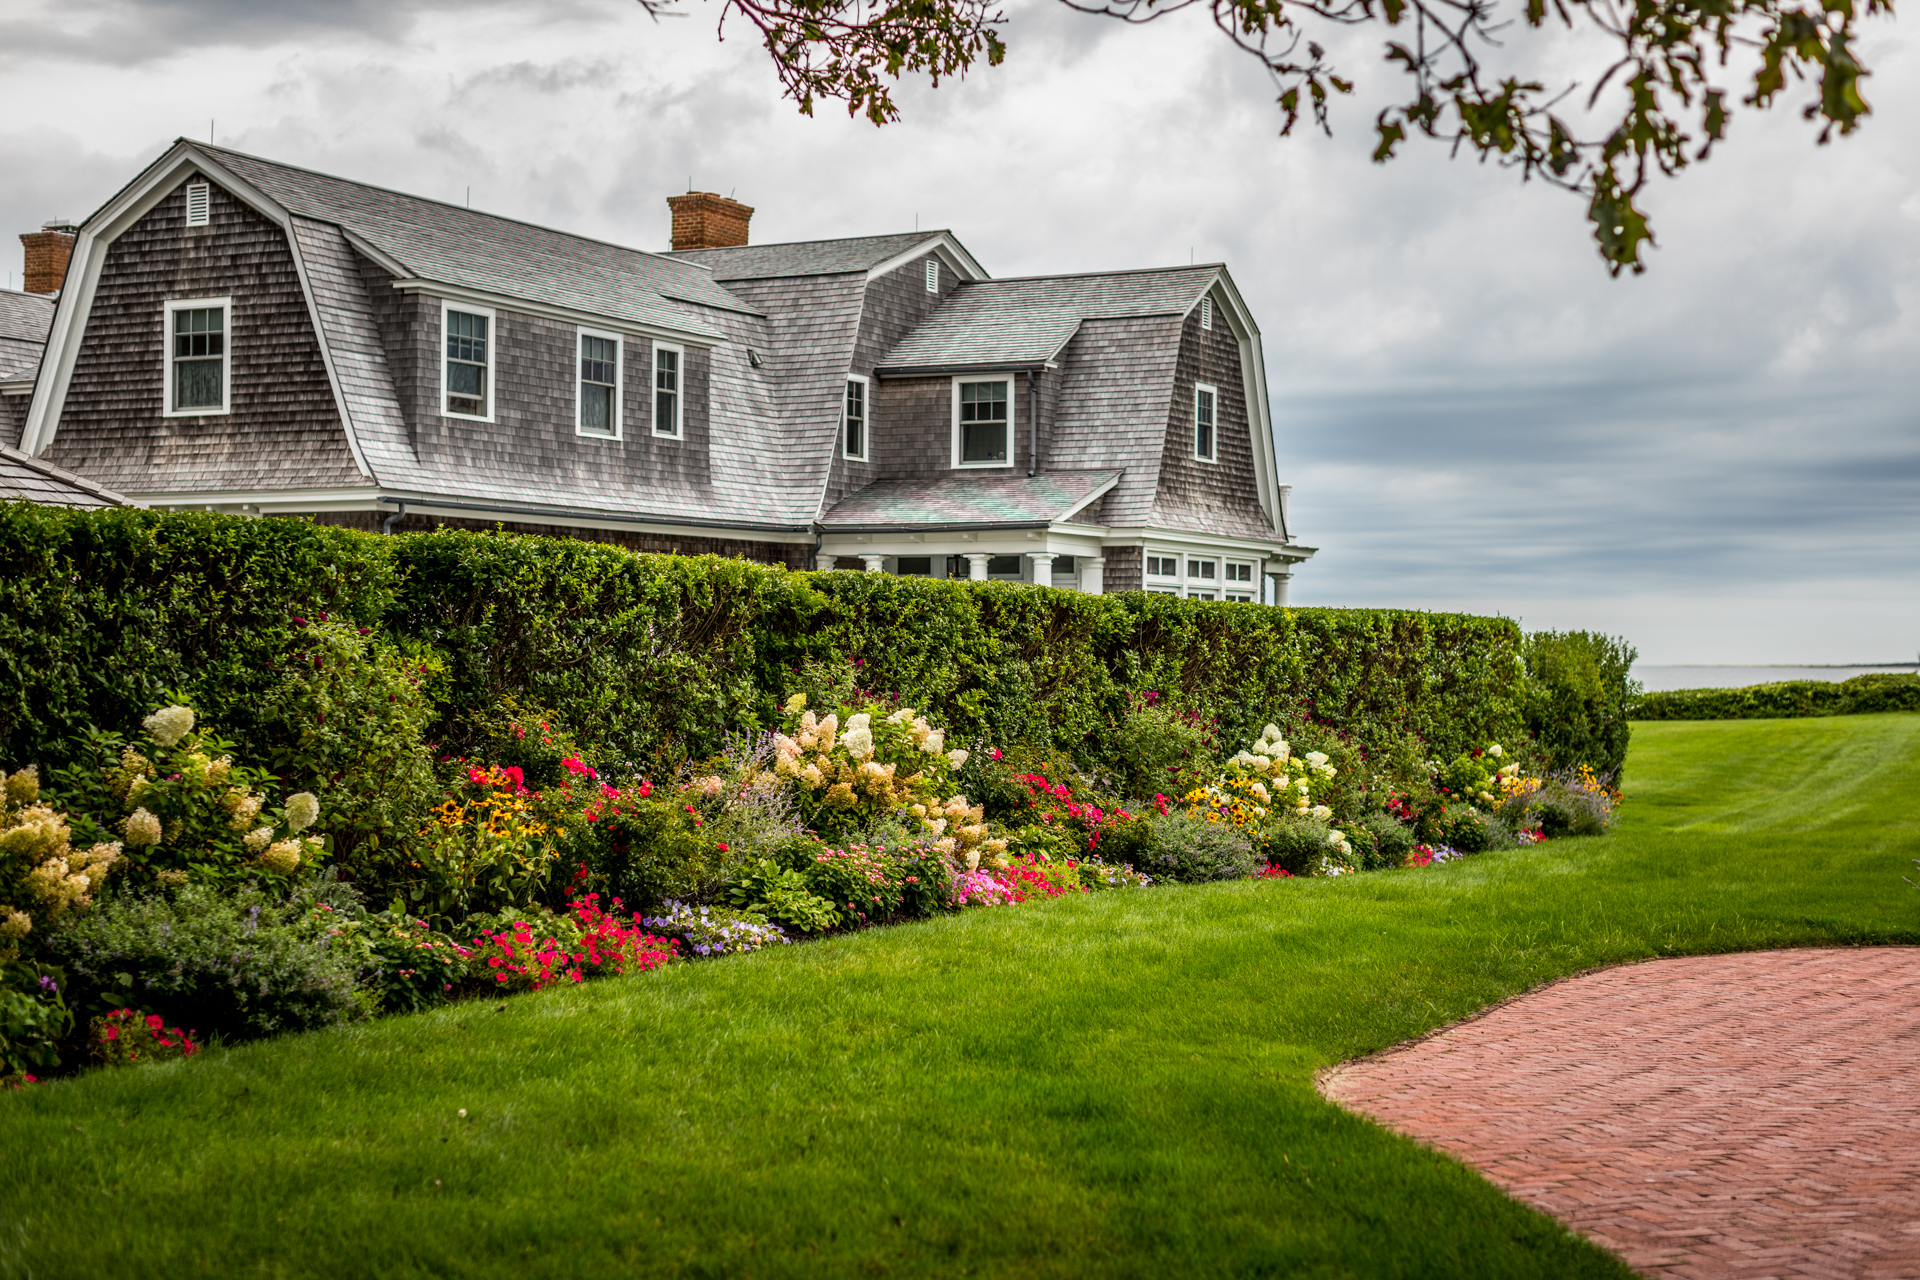 Cottage Garden Ideas by popular New England life and style blogger, Shannon Shipman: image of house with shingle siding, a hedge bush, and various flowers.